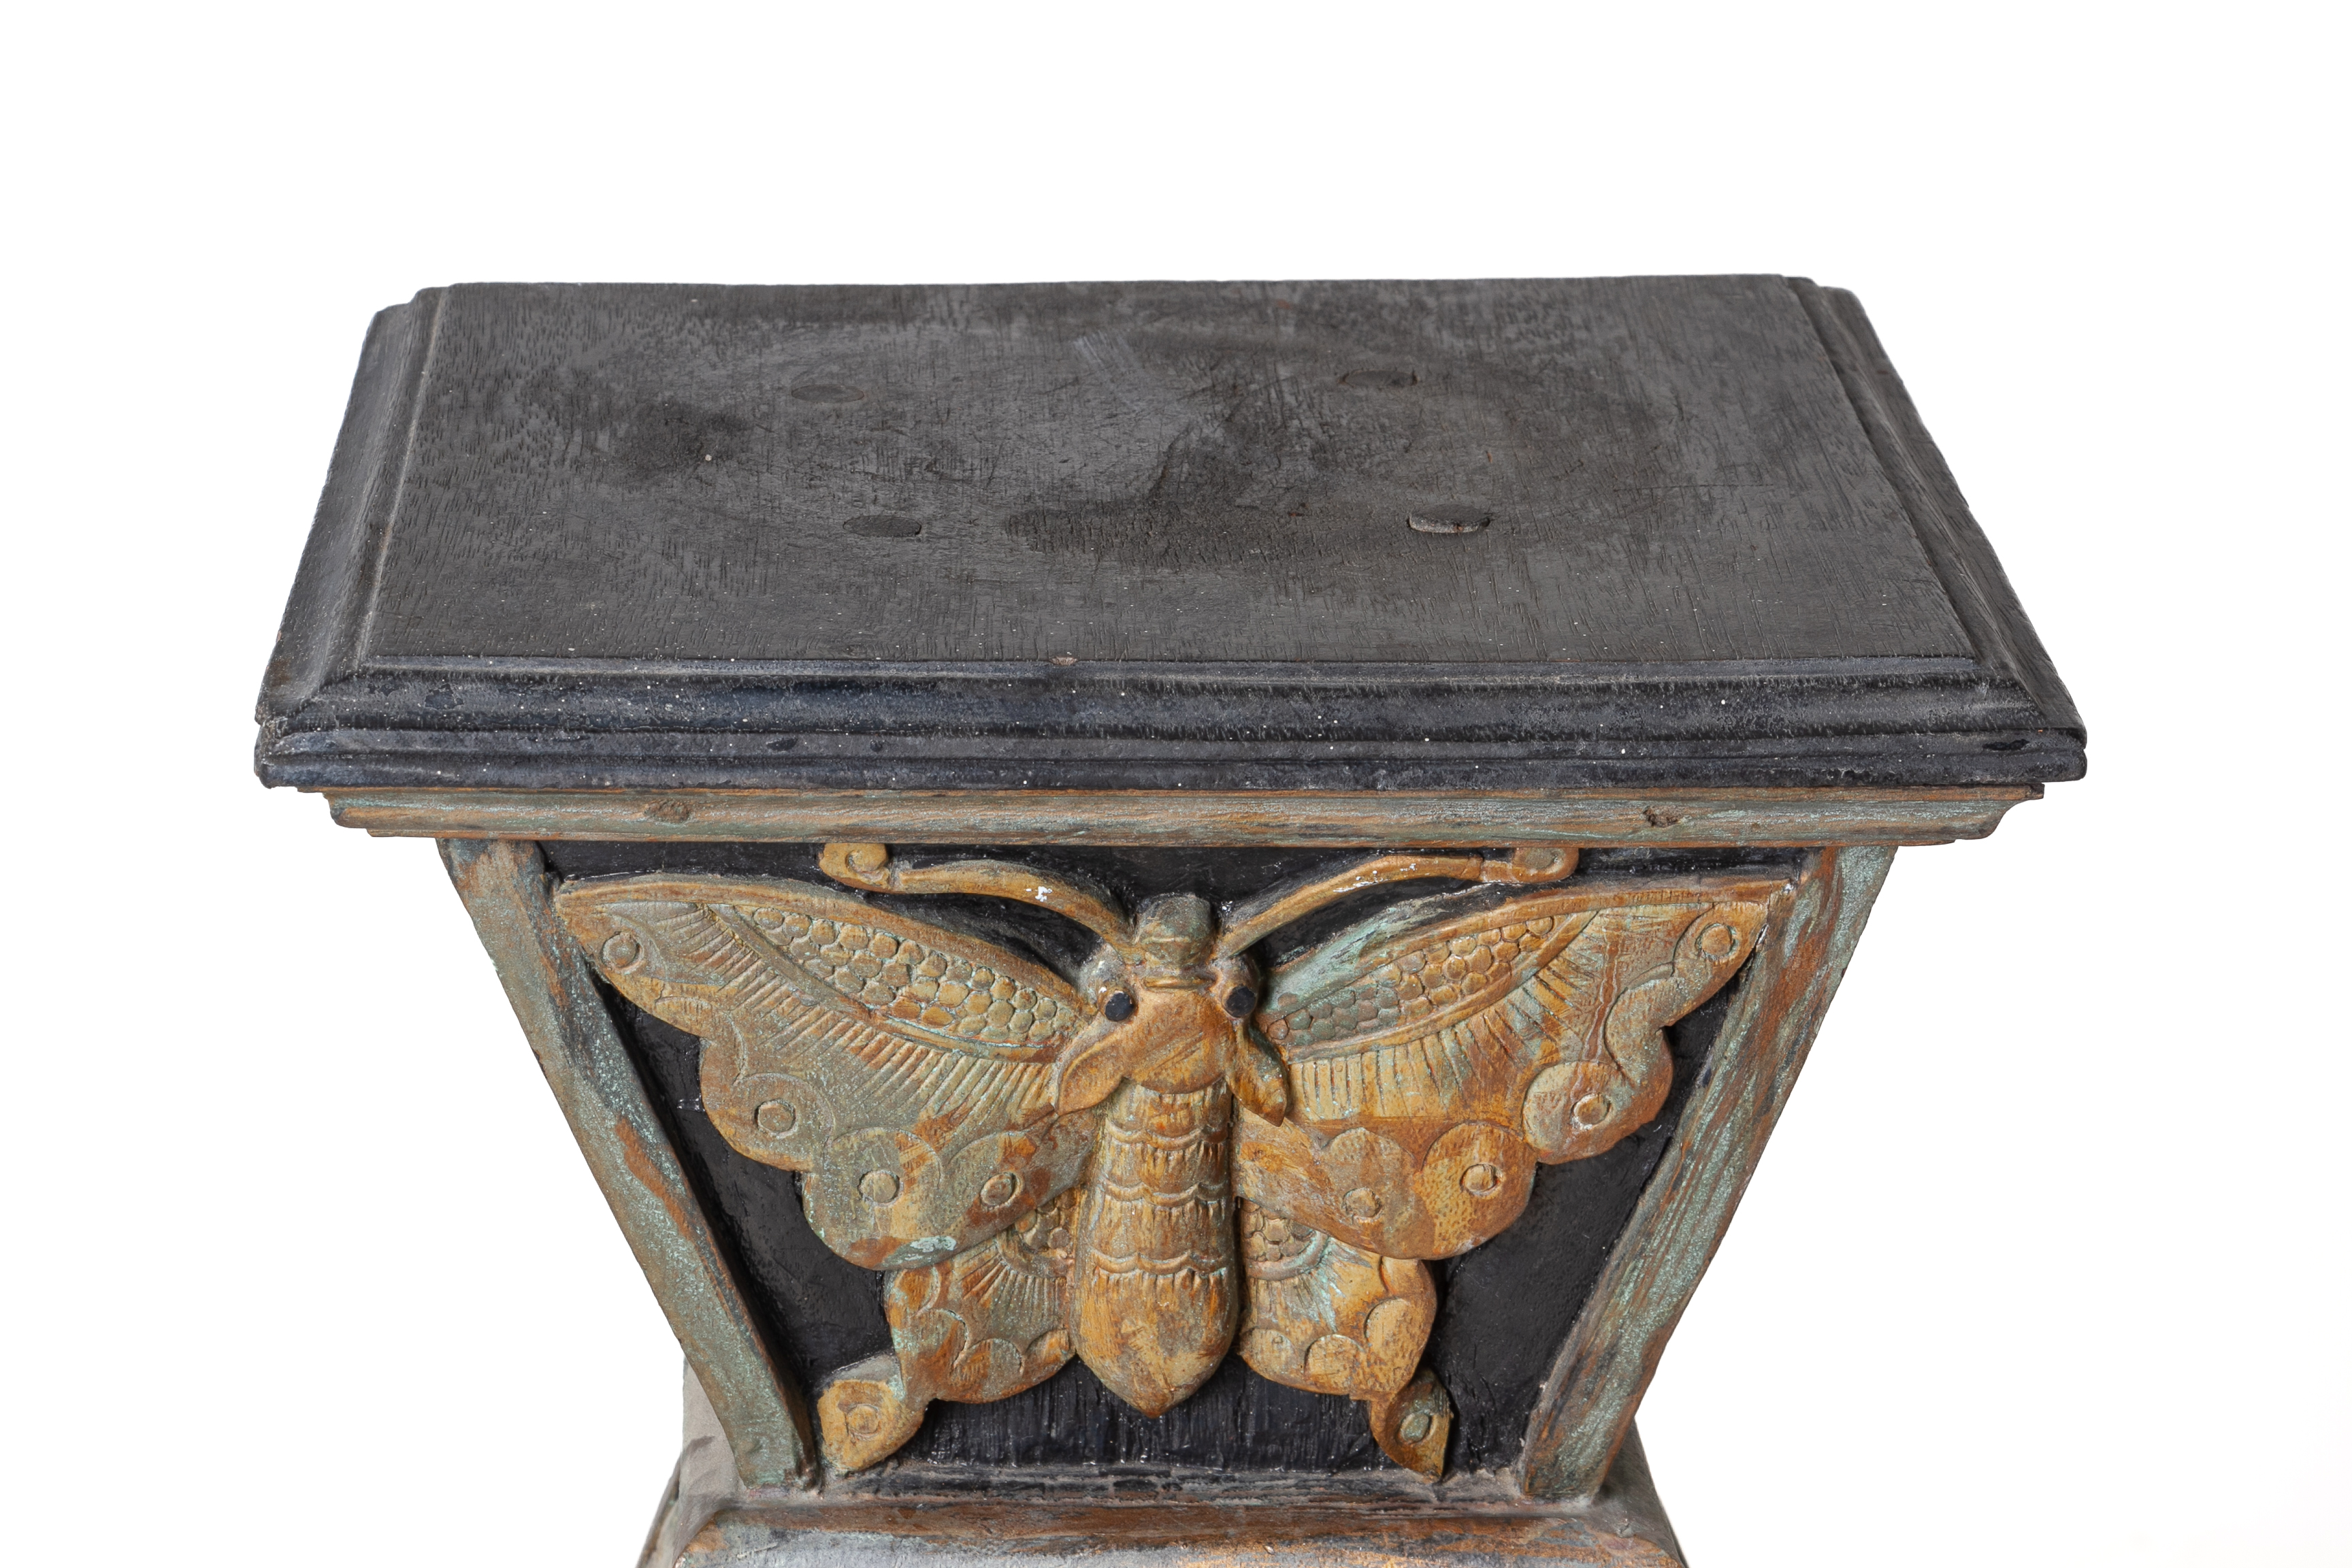 A CARVED WOOD PEDESTAL OR JARDINIERE STAND - Image 3 of 3